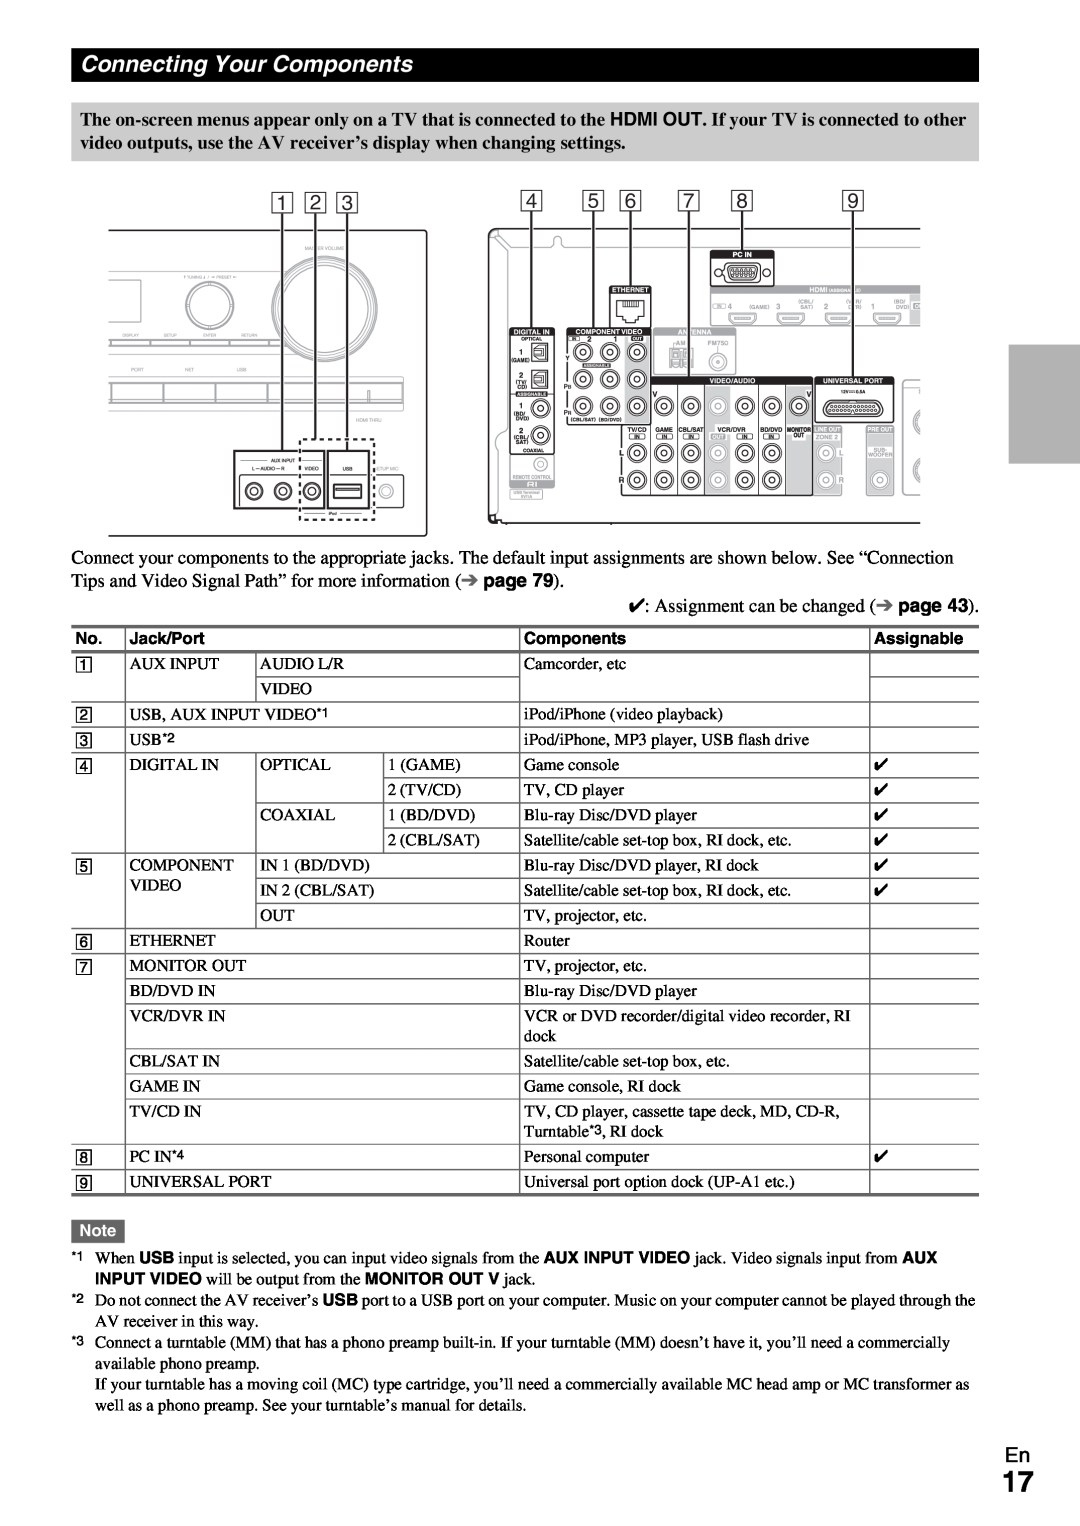 Onkyo HT-R990 instruction manual Connecting Your Components, A B C 